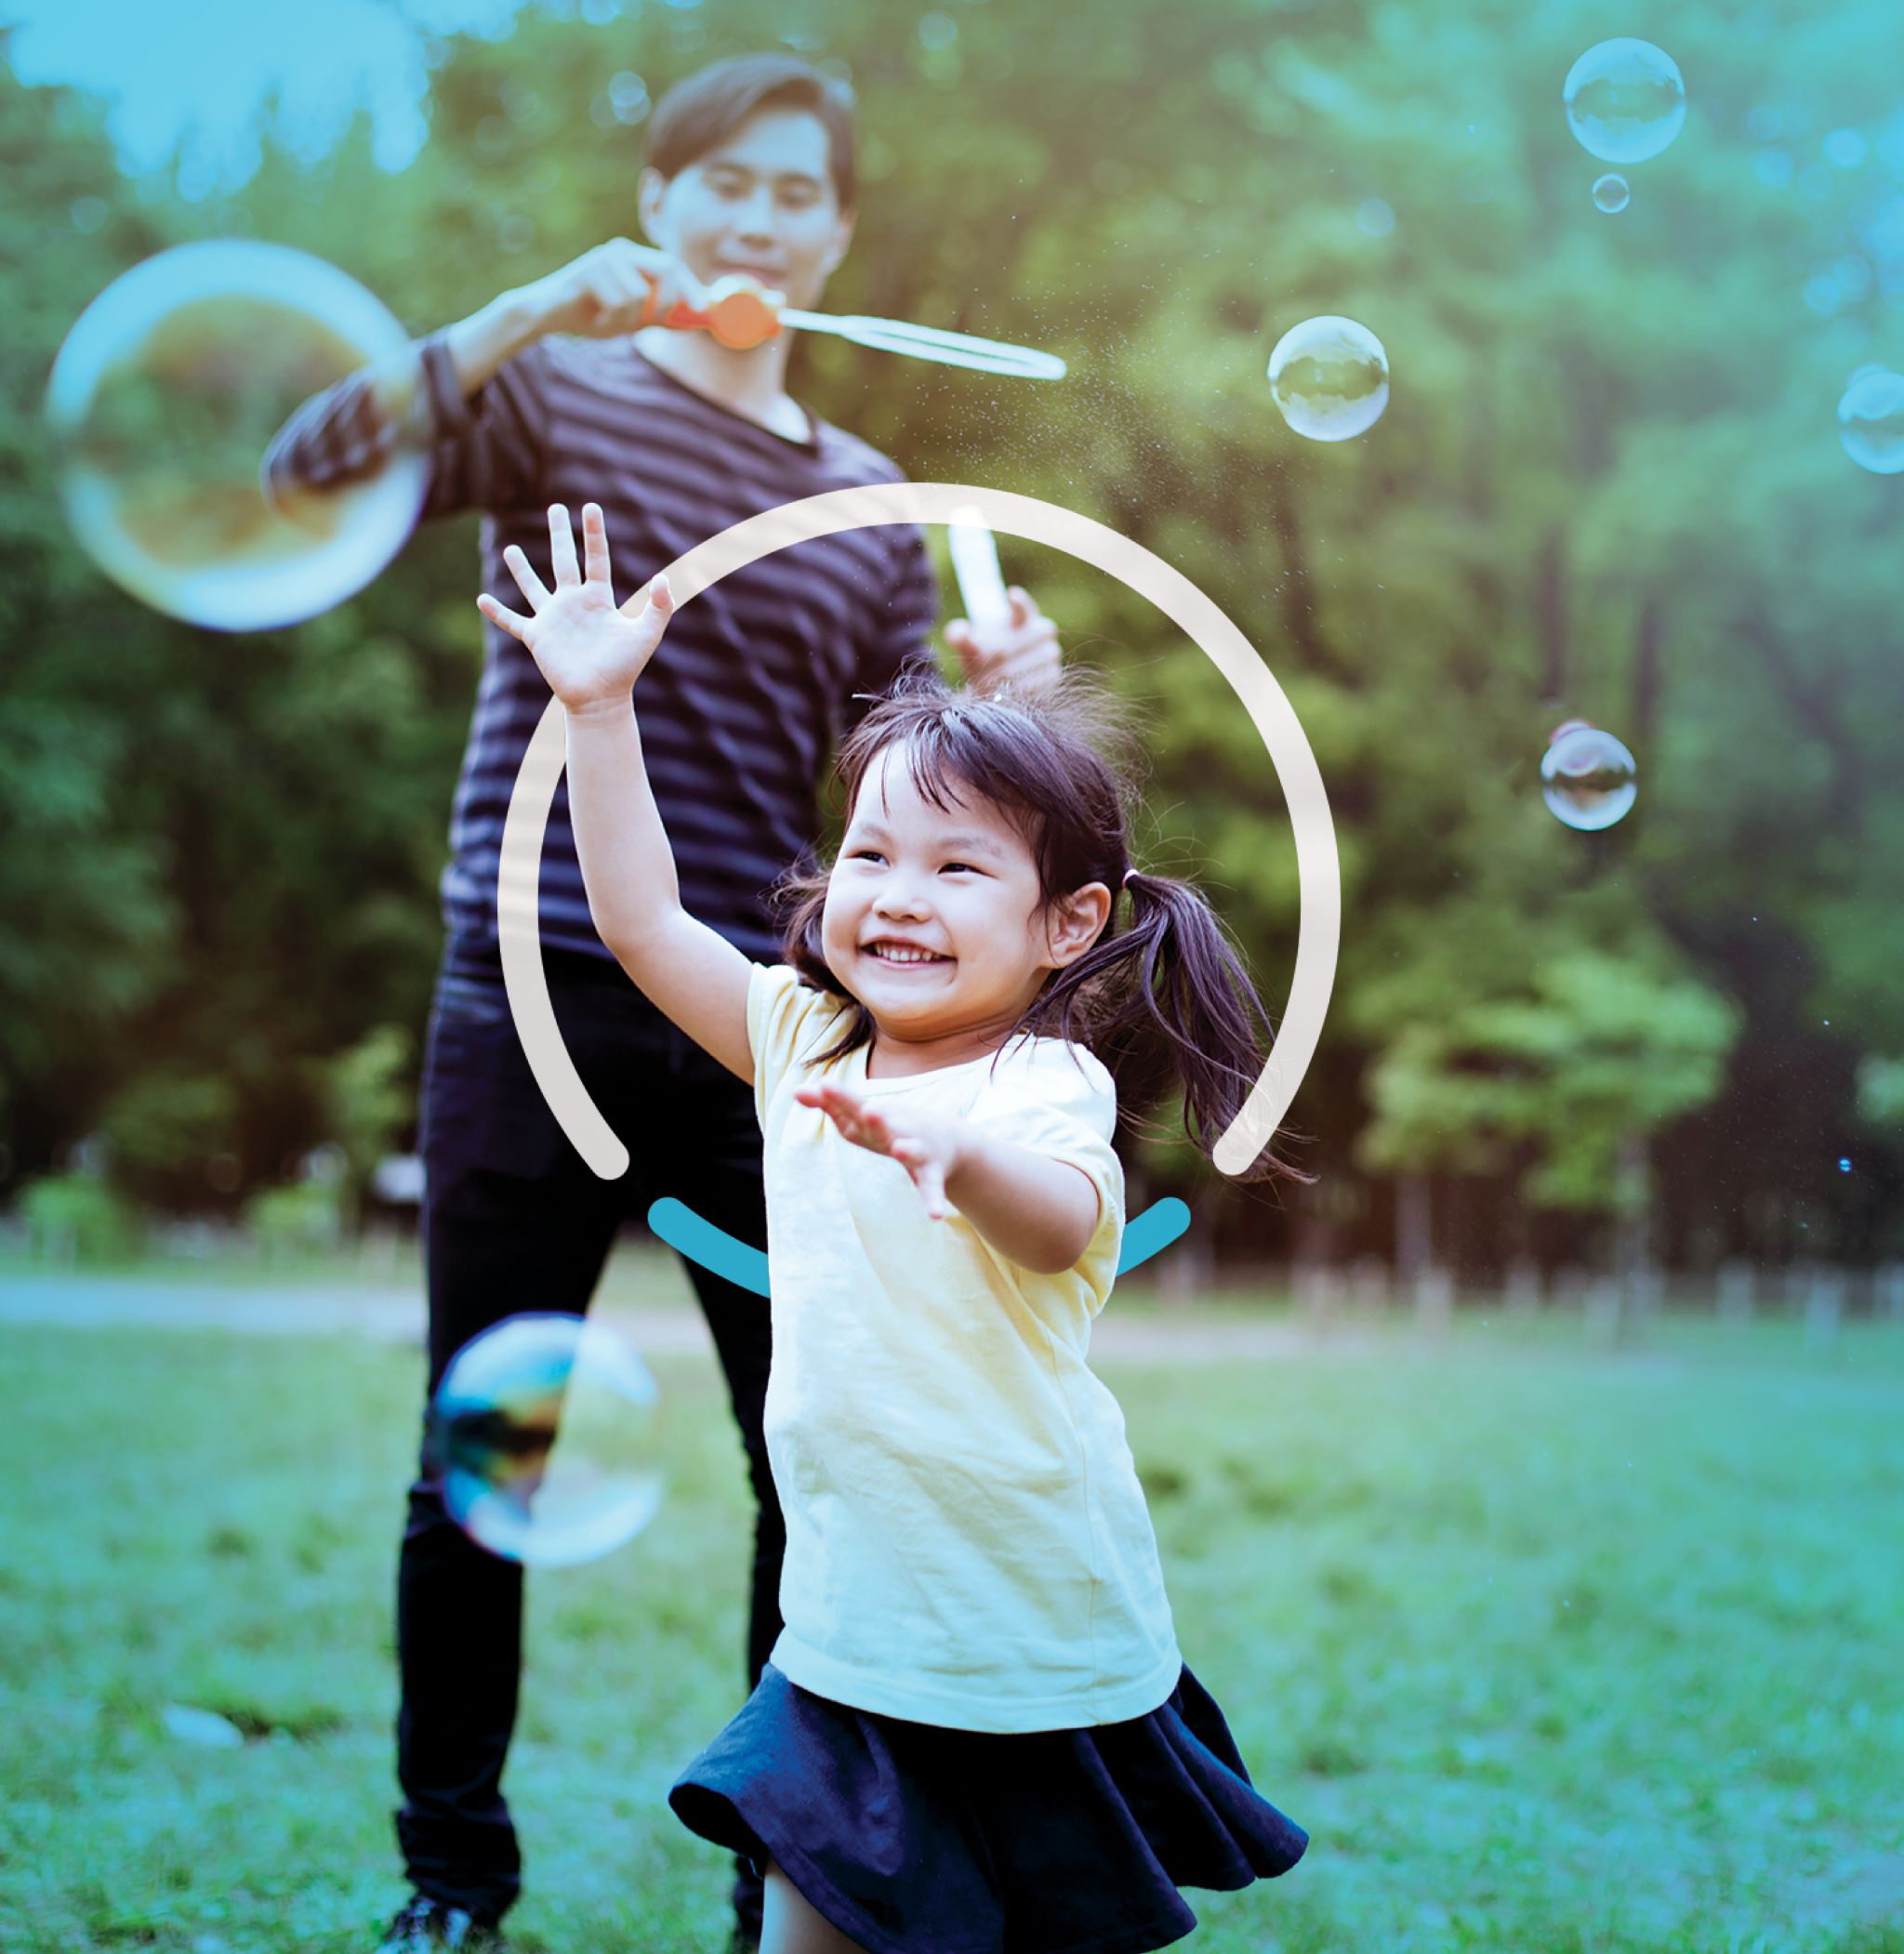 An adult and child play with bubbles outside